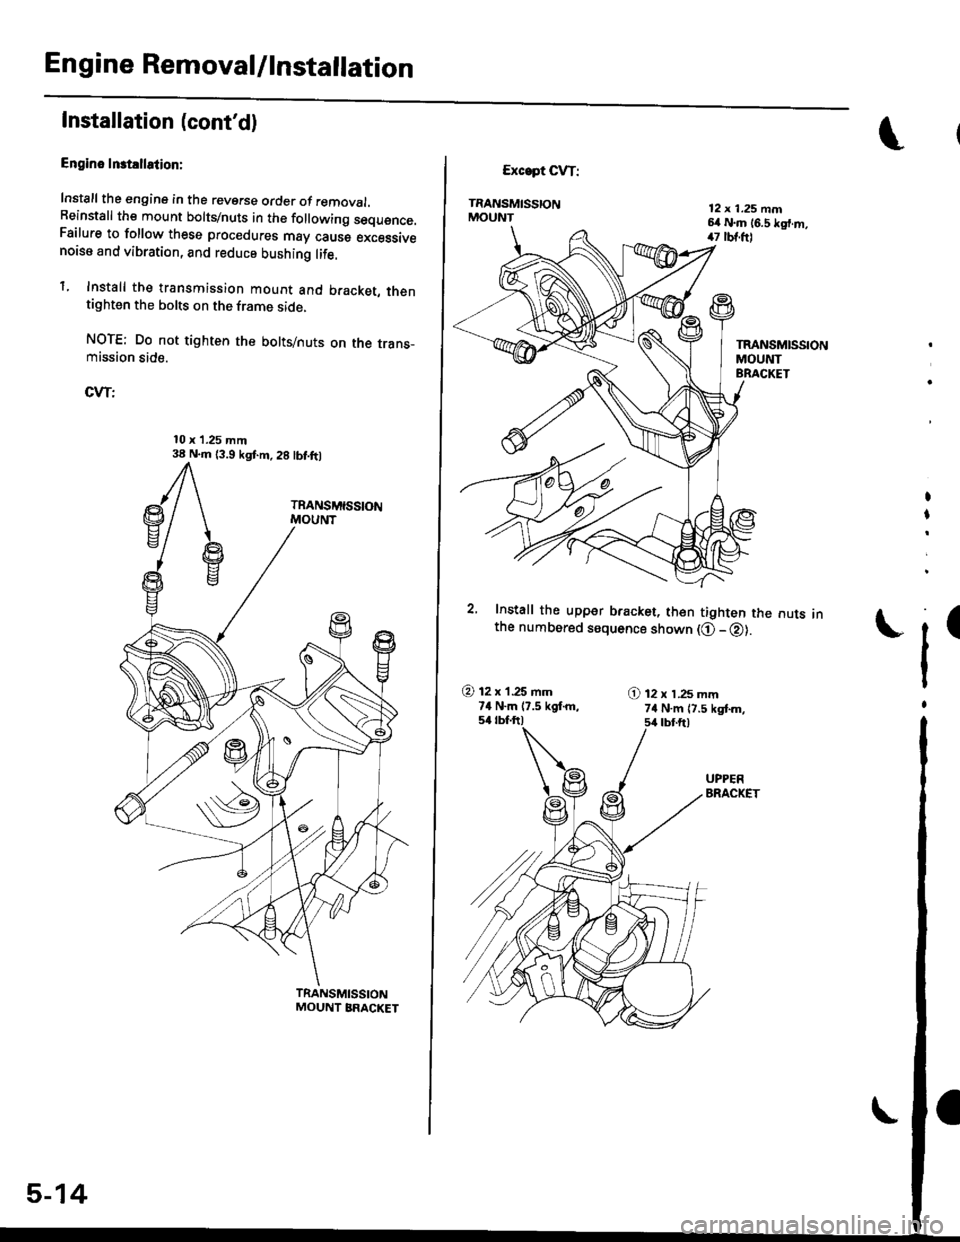 HONDA CIVIC 2000 6.G Service Manual Engine Removal/lnstallation
Installation (contd)
Engino Inst!llation:
Install the engine in the reverse order of removal.Beinstall the mount bolts/nuts in the following sequence.Failure to follow the